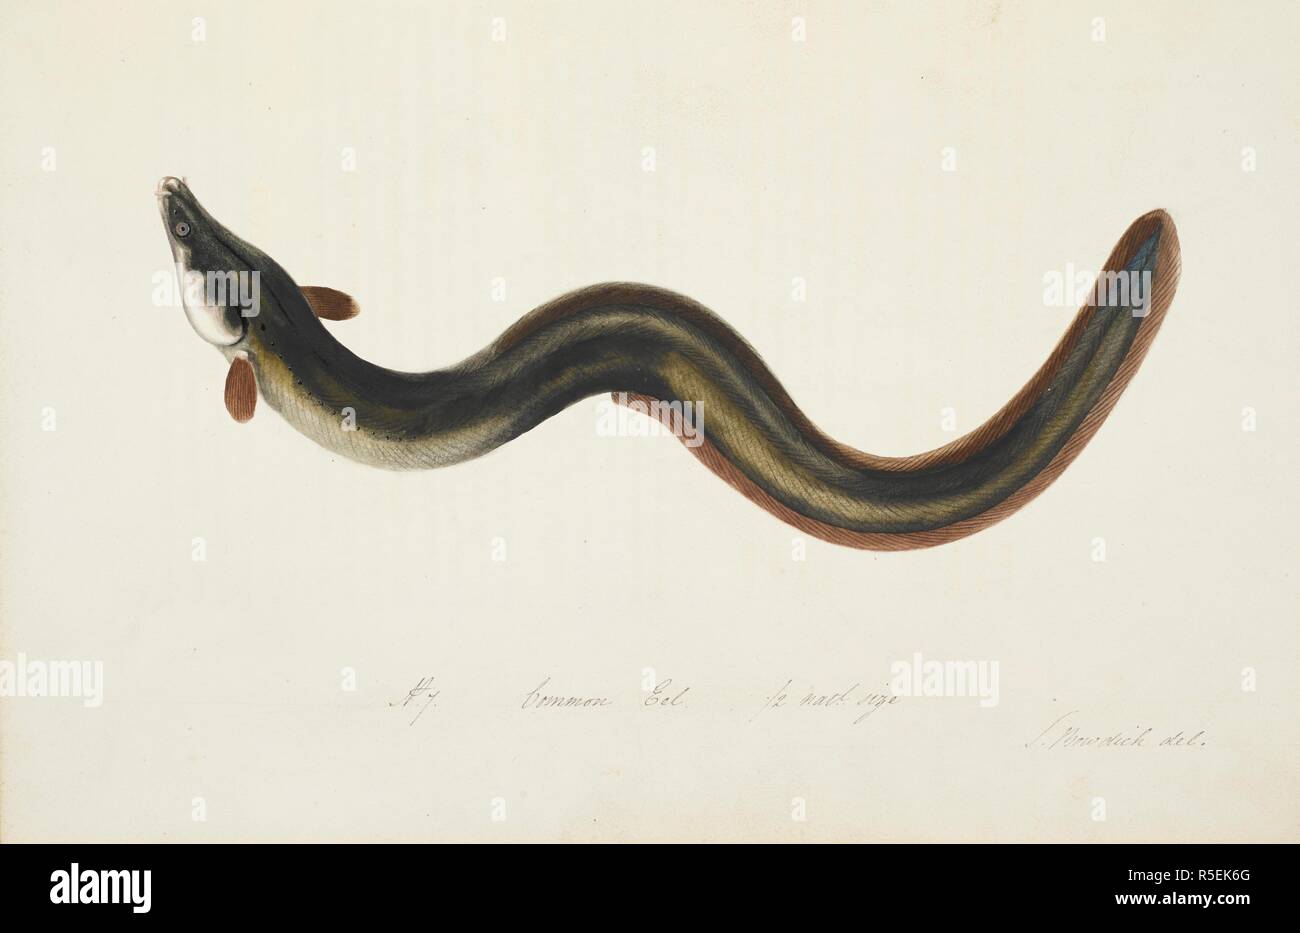 Common Eel. The Fresh-water Fishes of Great Britain, drawn and described by Mrs. T. Edward Bowdich. The Authoress; R. Ackermann: London, 1828. Source: L.R.404.c.5. Plate 7. Author: Bowdich, Sarah. Stock Photo